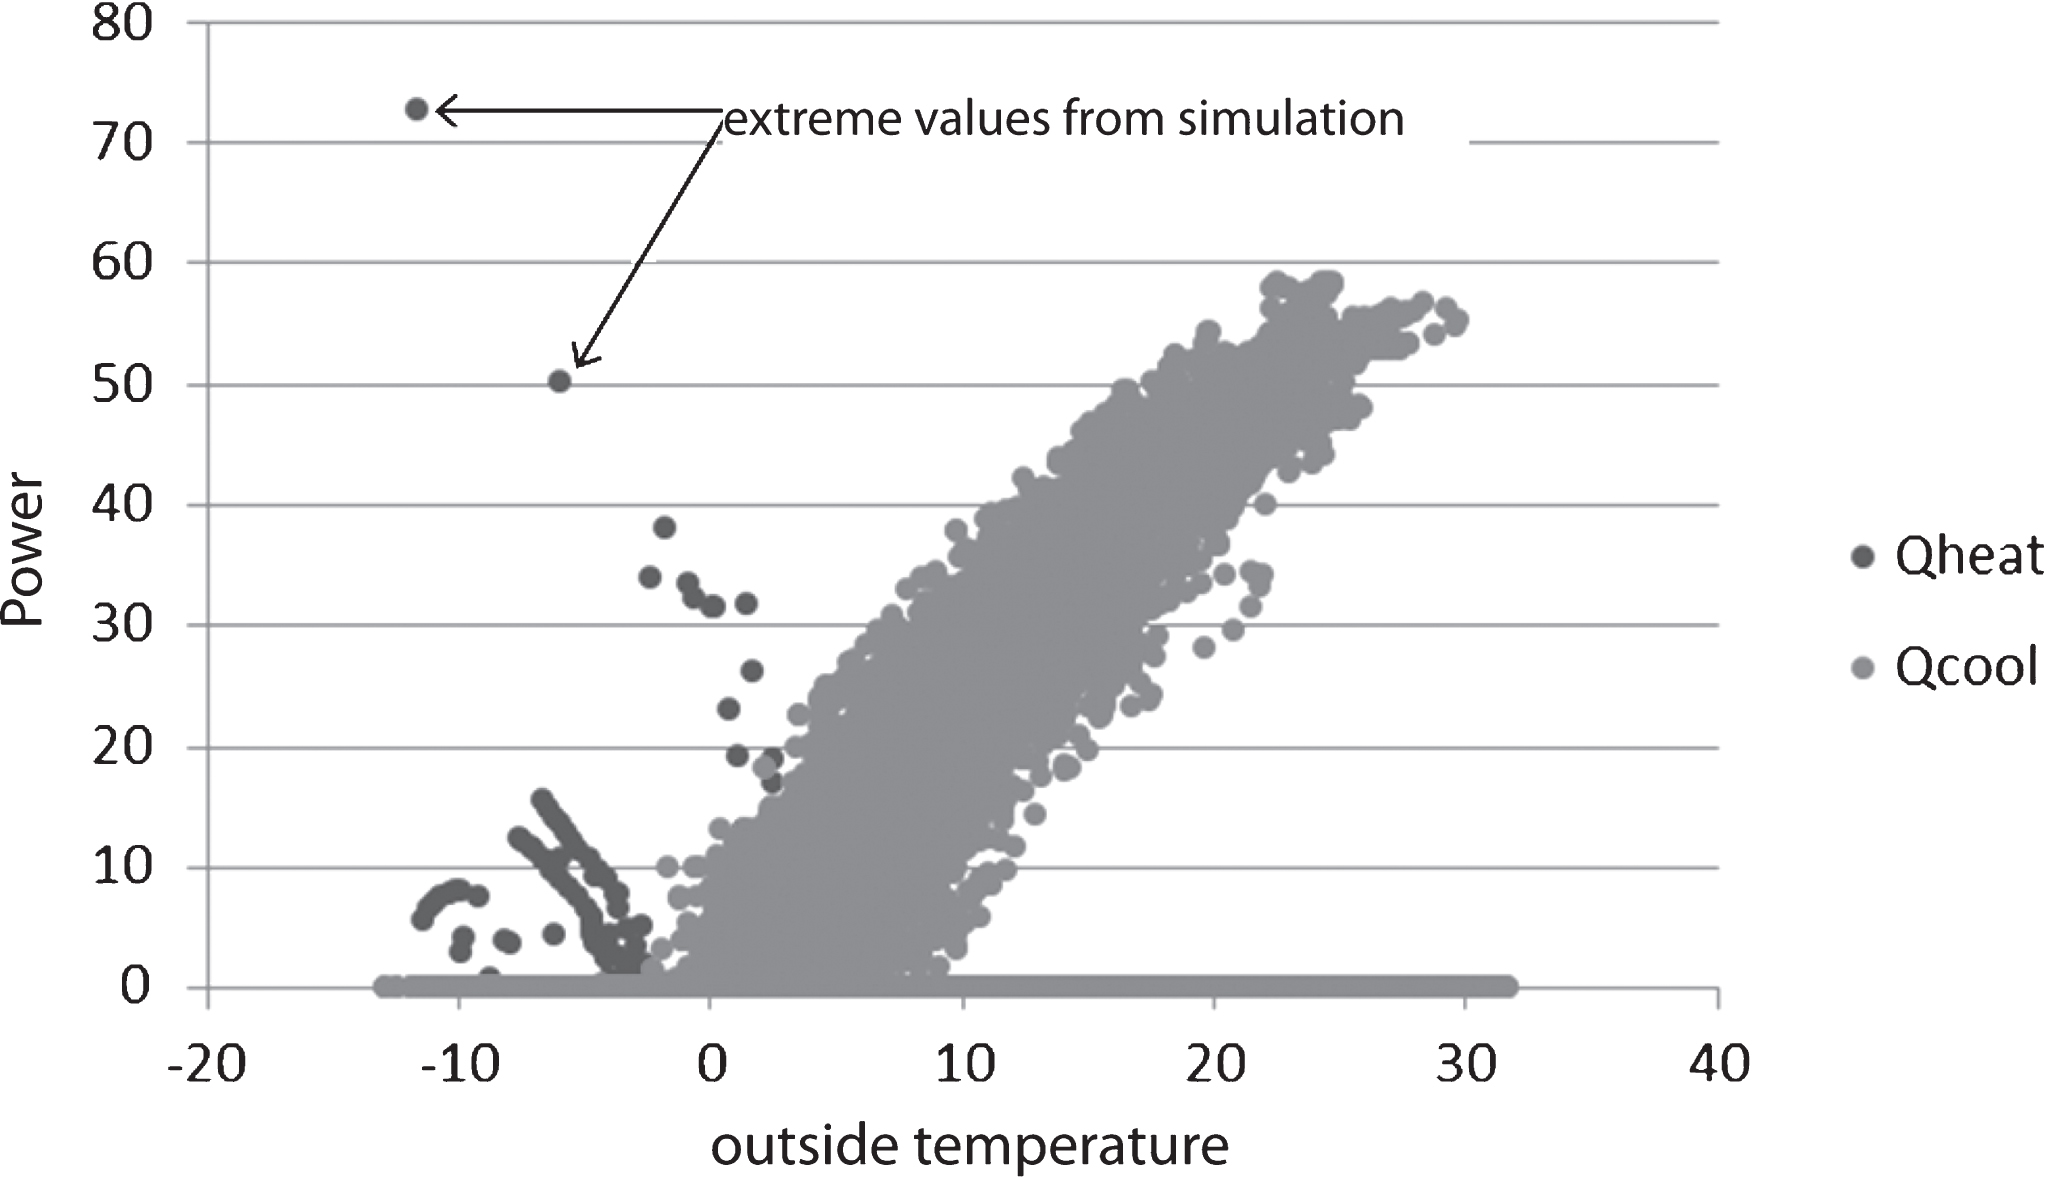 TRNSYS-simulation of heating and cooling capacity in relation to outdoor temperature based on a production process with a three-shift operation and an average power consumption of all machines of 83 kW (Thumm, 2013).